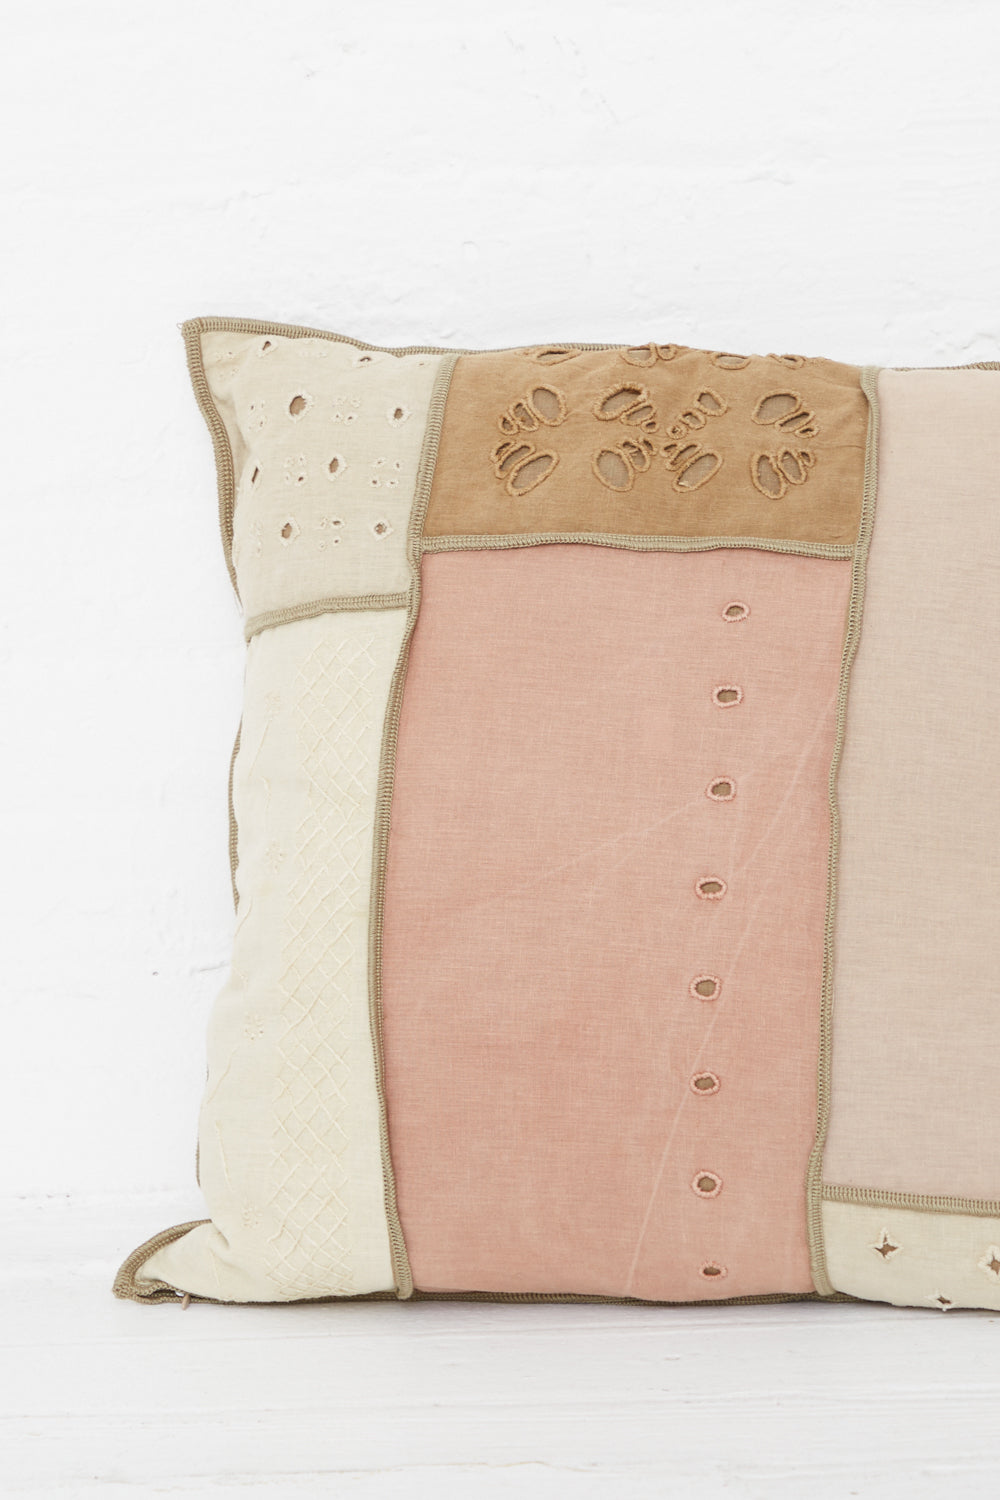 Luna Del Pinal - Natural Hand-Dyed Triple Embroidered Cushion in Tortilla detail view